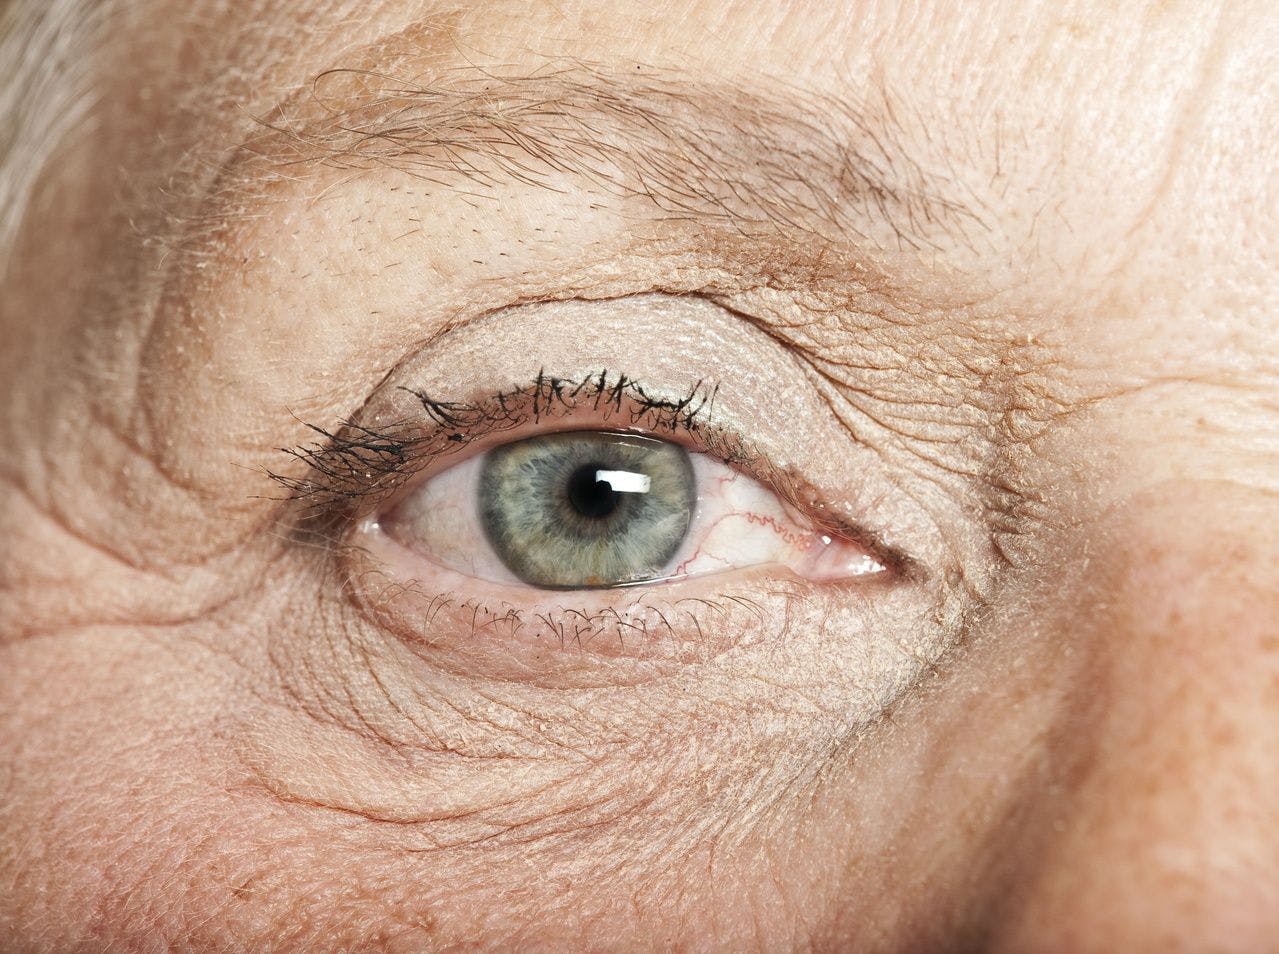 How Does the Co-Occurrence of Visual Impairment, Dementia Affect Disability Risk?